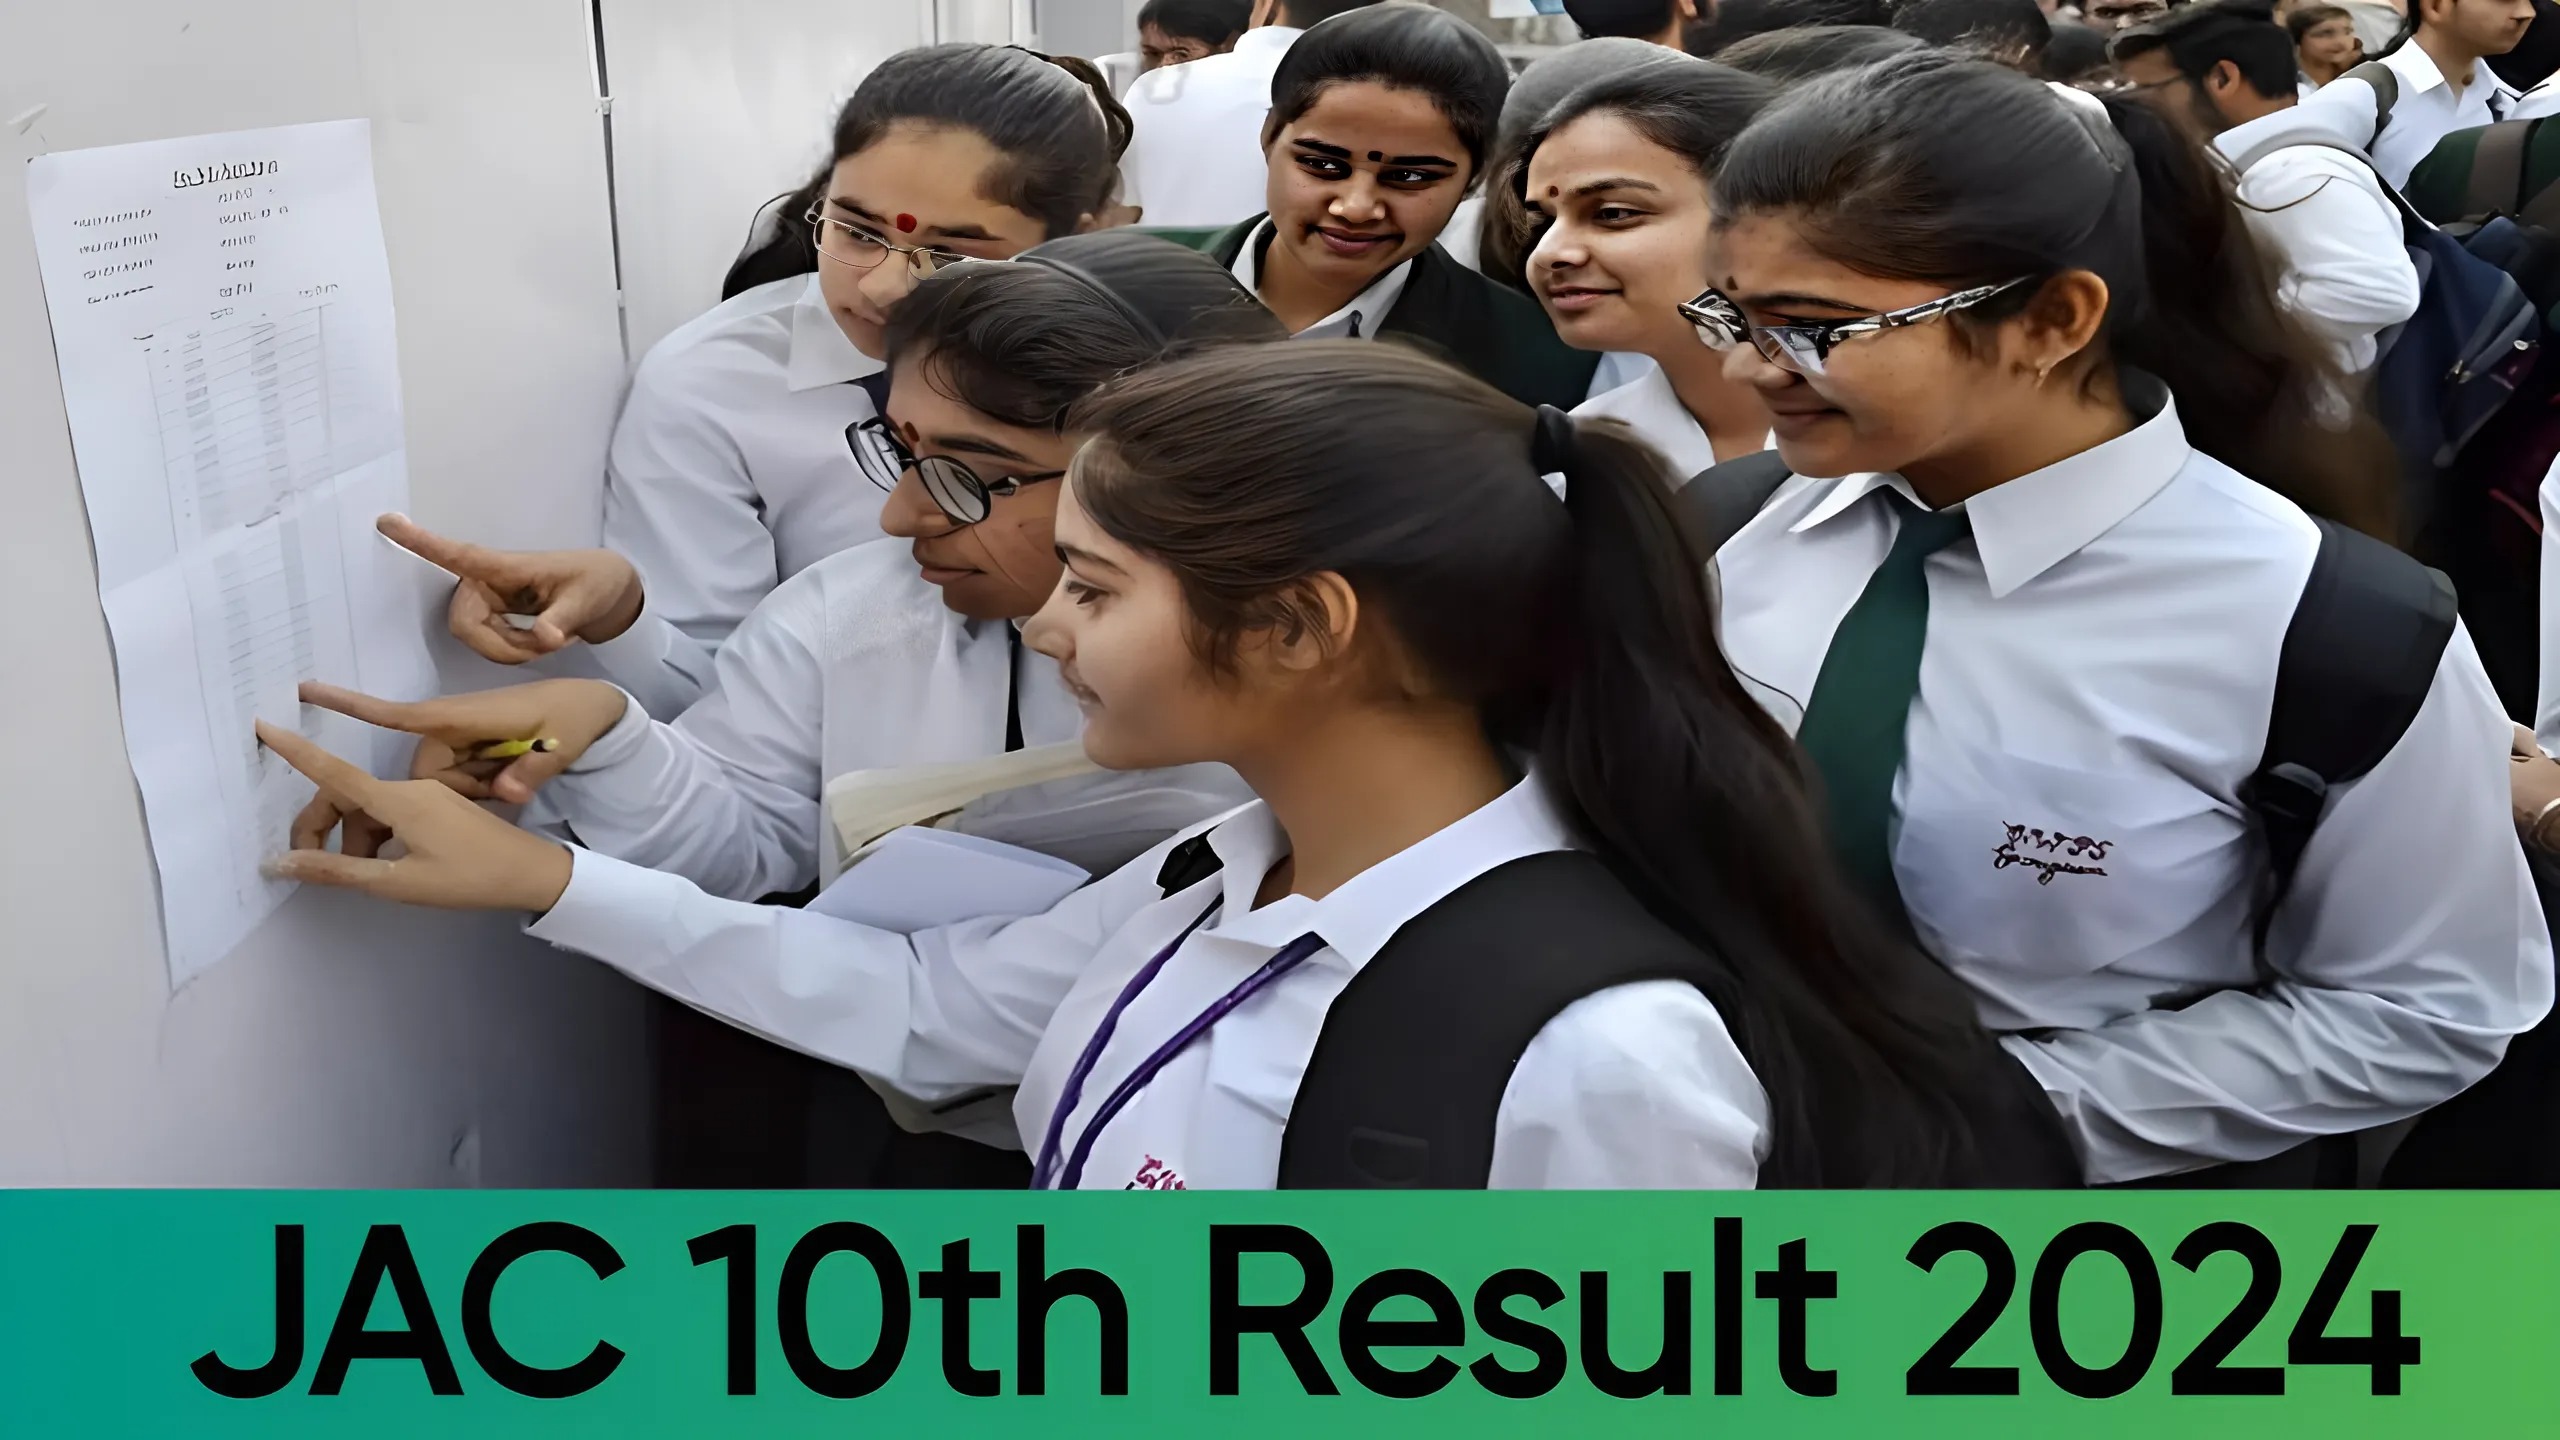 JAC 10th Result 2024